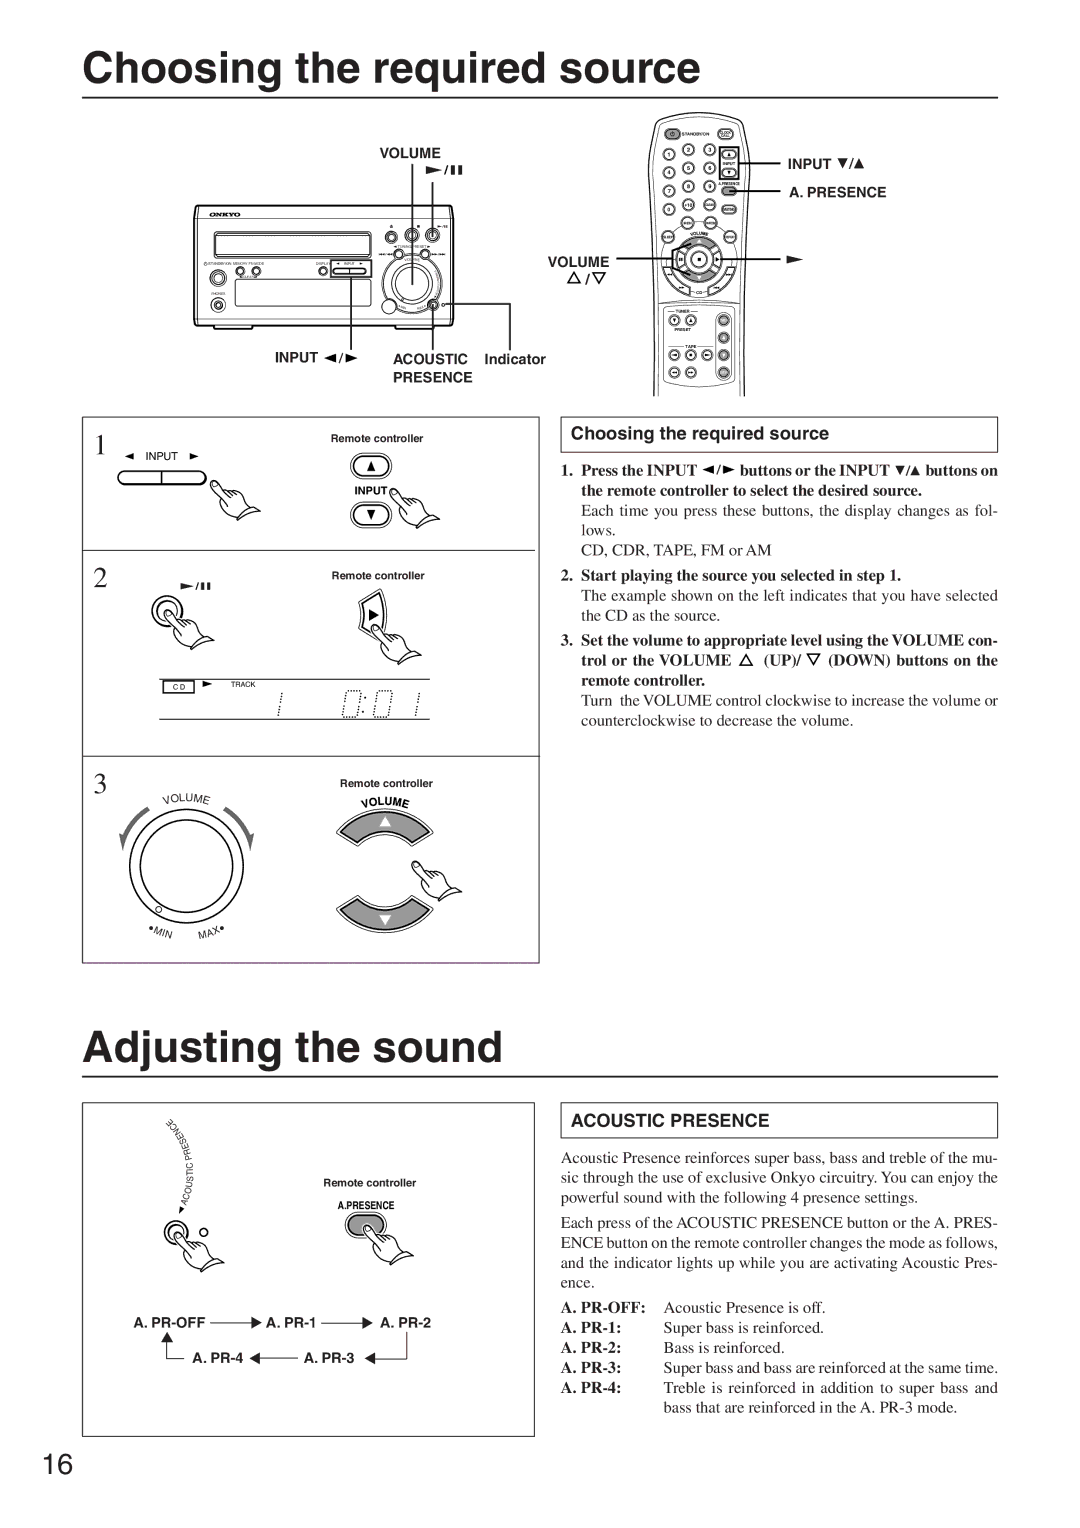 Onkyo CR-305FX Choosing the required source, Adjusting the sound, Start playing the source you selected in step 